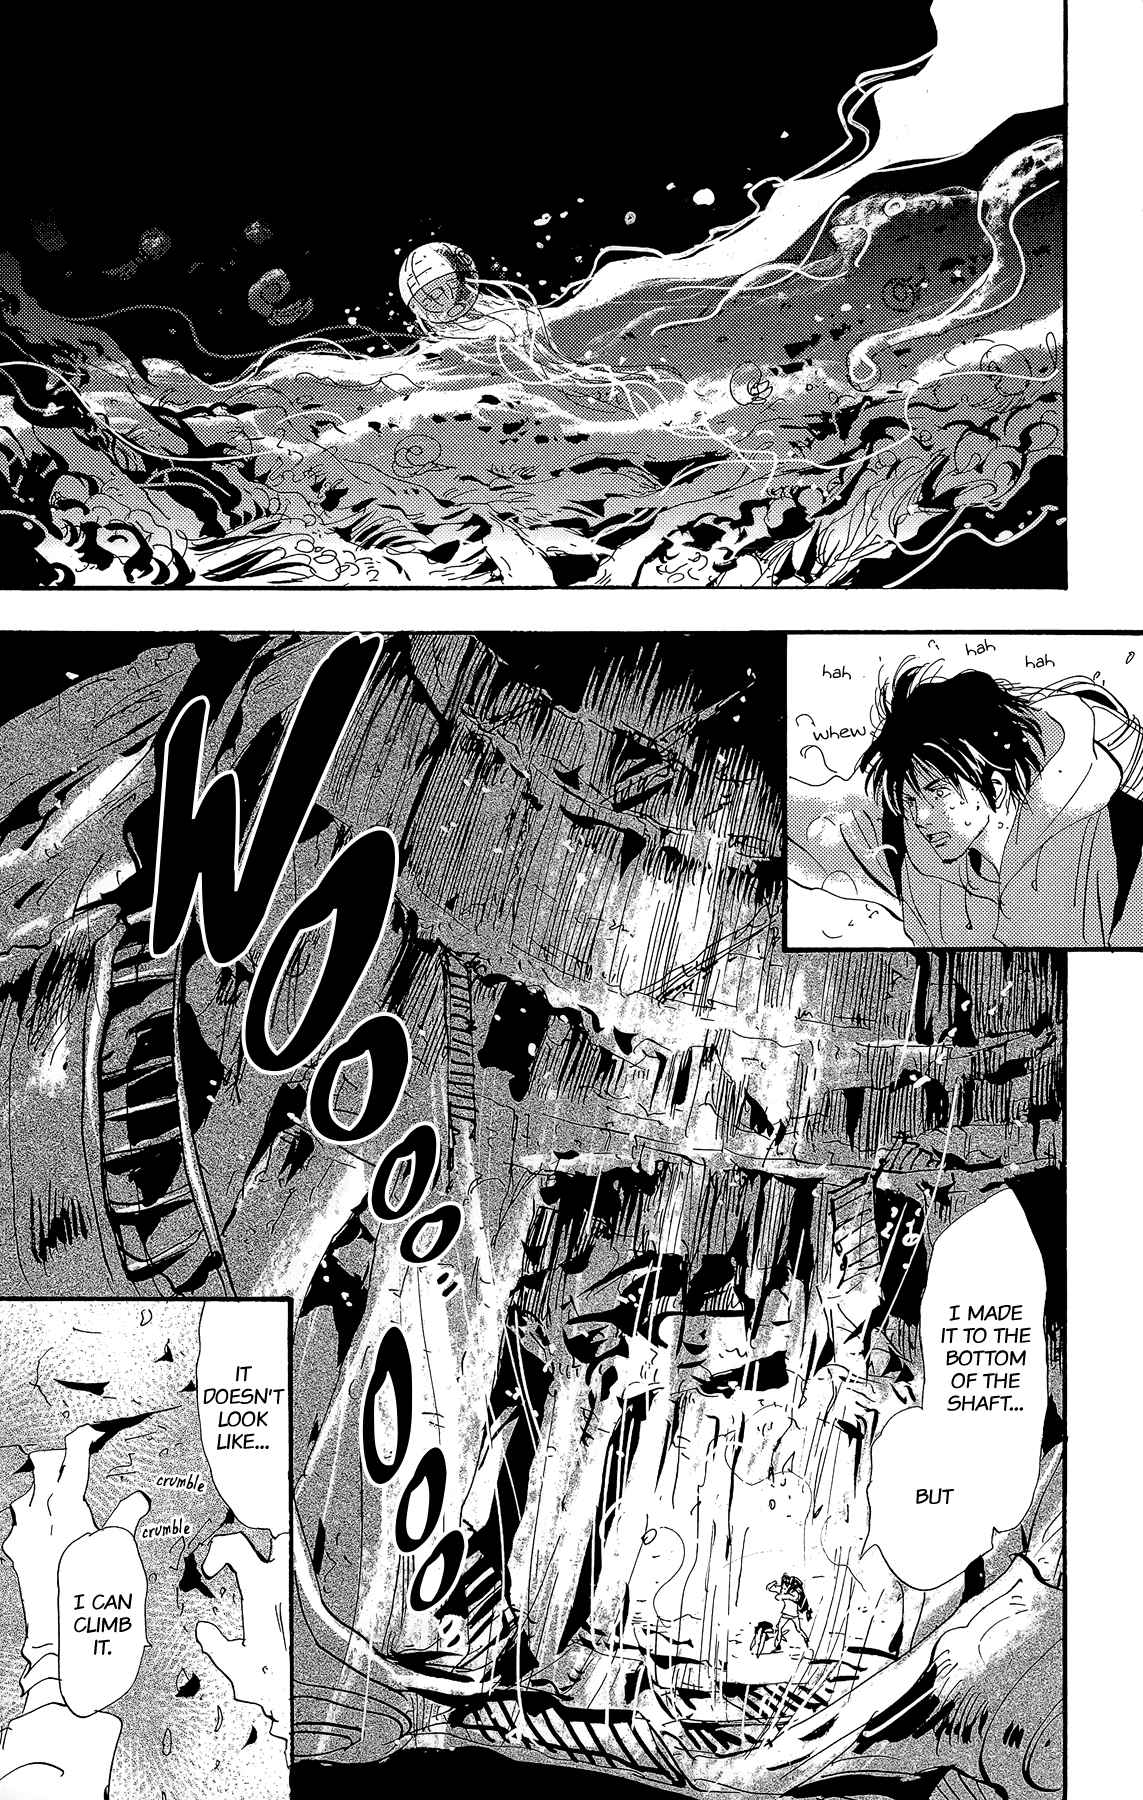 7 Seeds Vol. 35 Ch. 178 Finale [Today, Then Tomorrow]